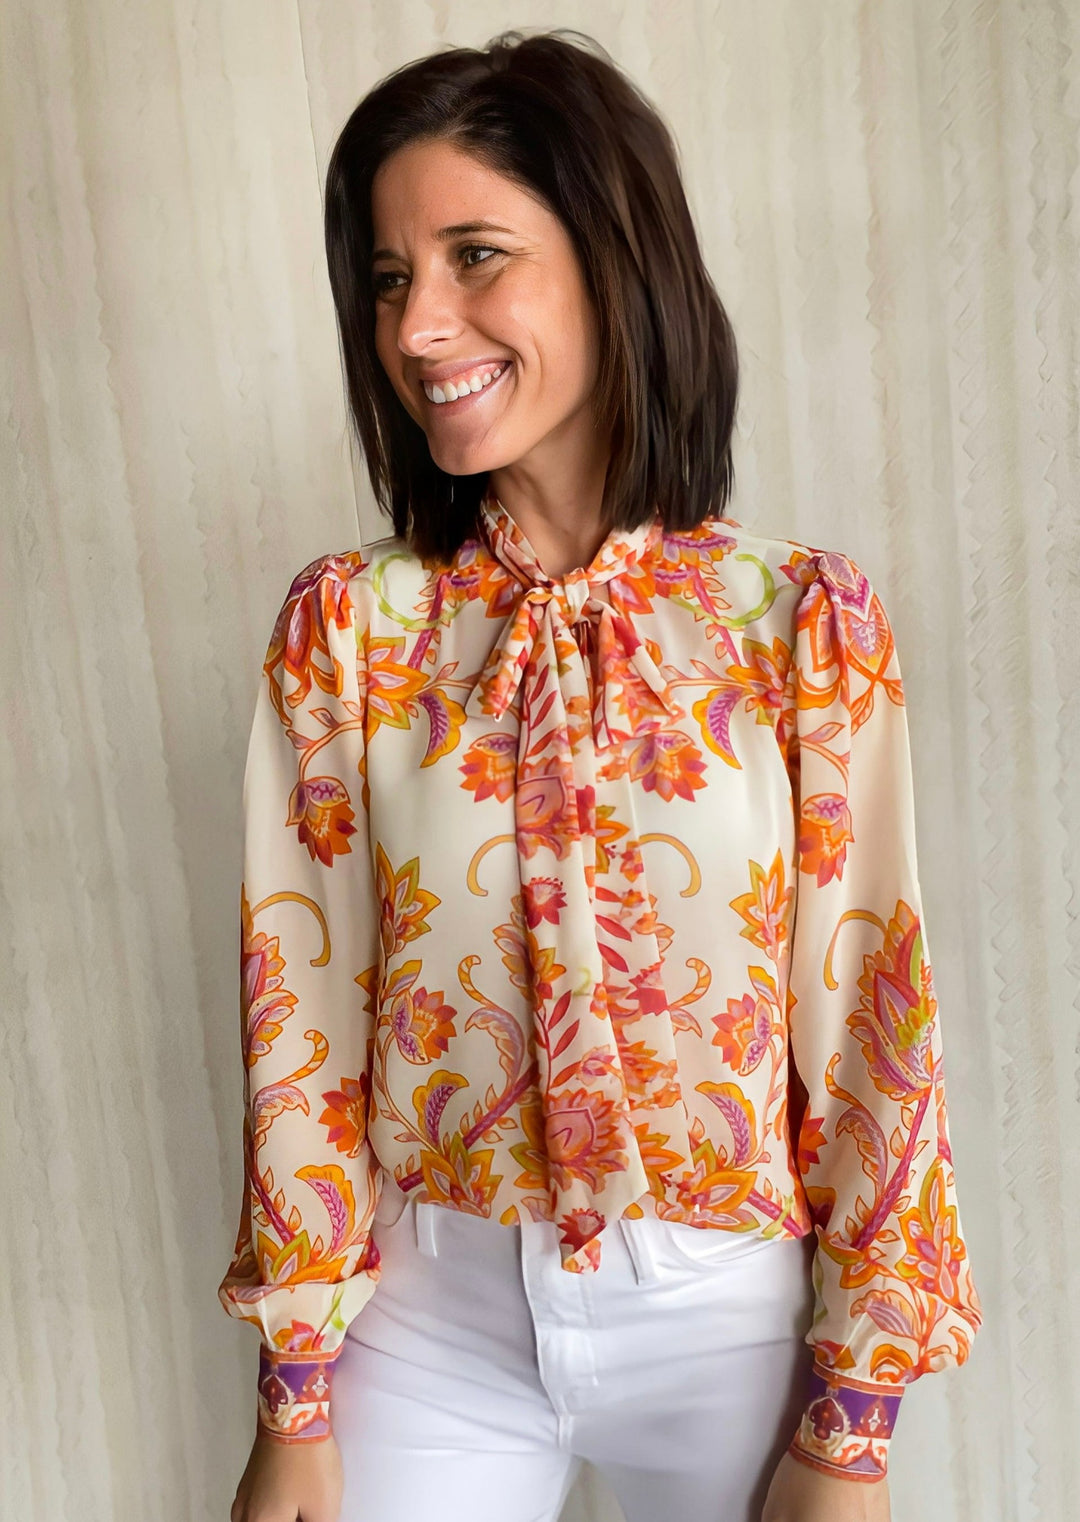 Long Sleeve Printed Blouse with tie in front. Ivory printed dress blouse.